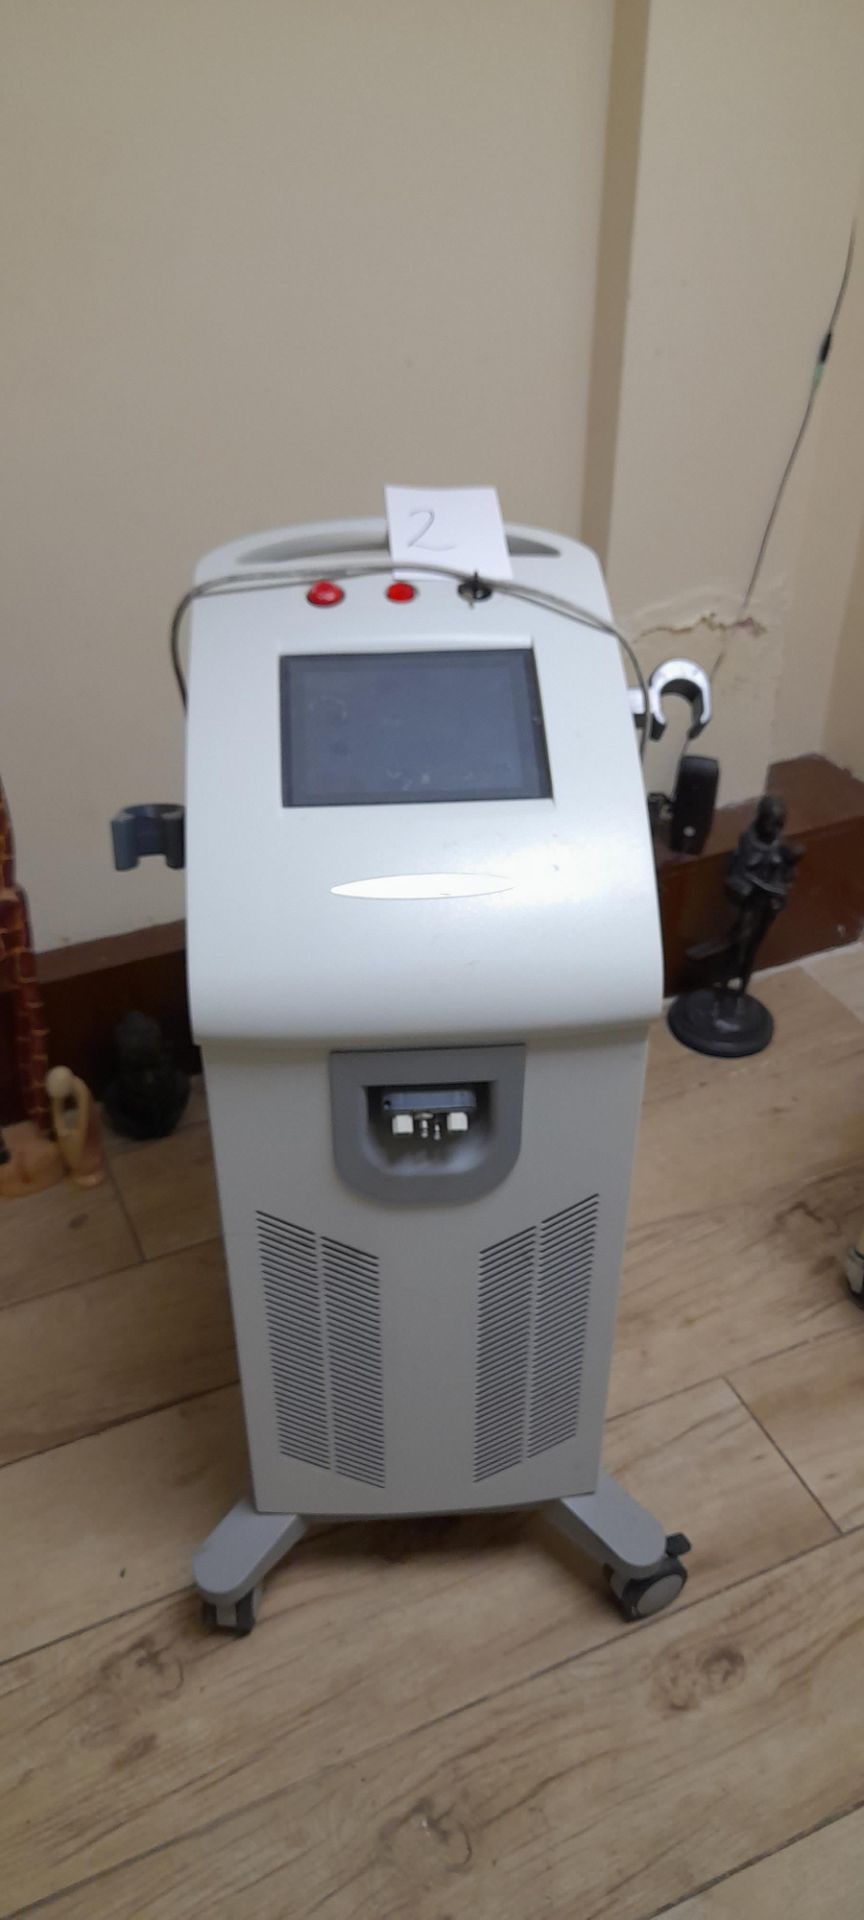 Alma Lasers Soprano XL laser technology hair removal system. Serial number SP1095 date 11.2008 laser